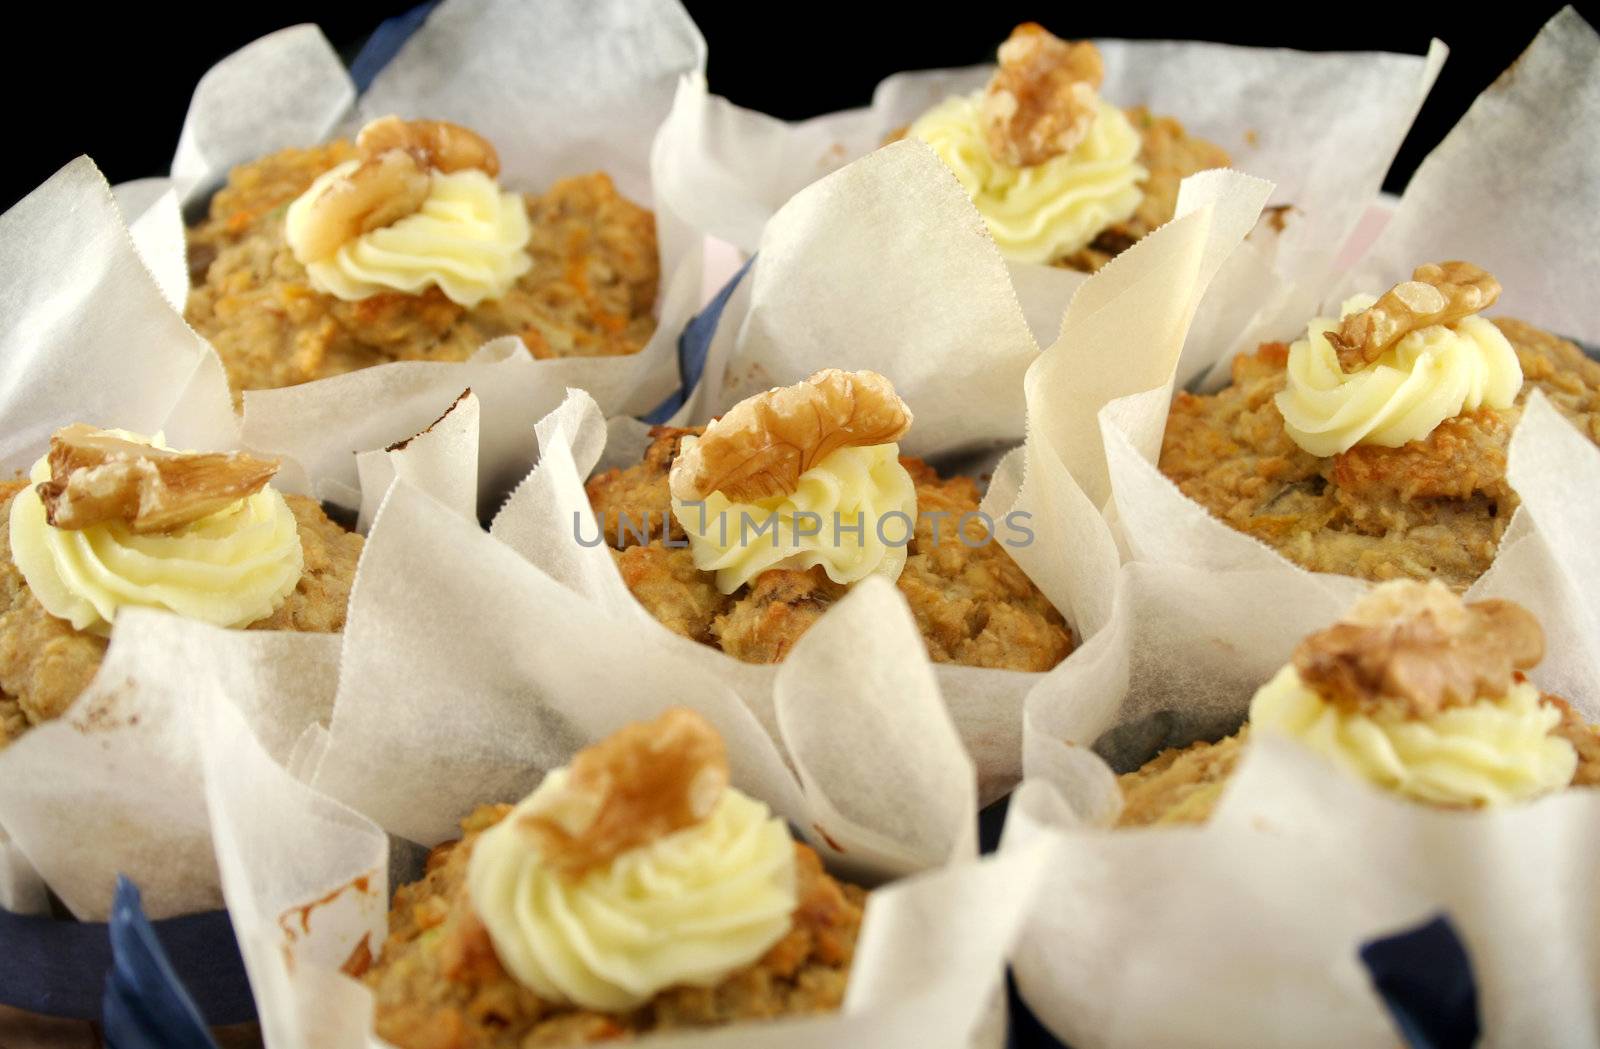 Homestyle fresh baked fruit muffins with cream cheese and walnuts.